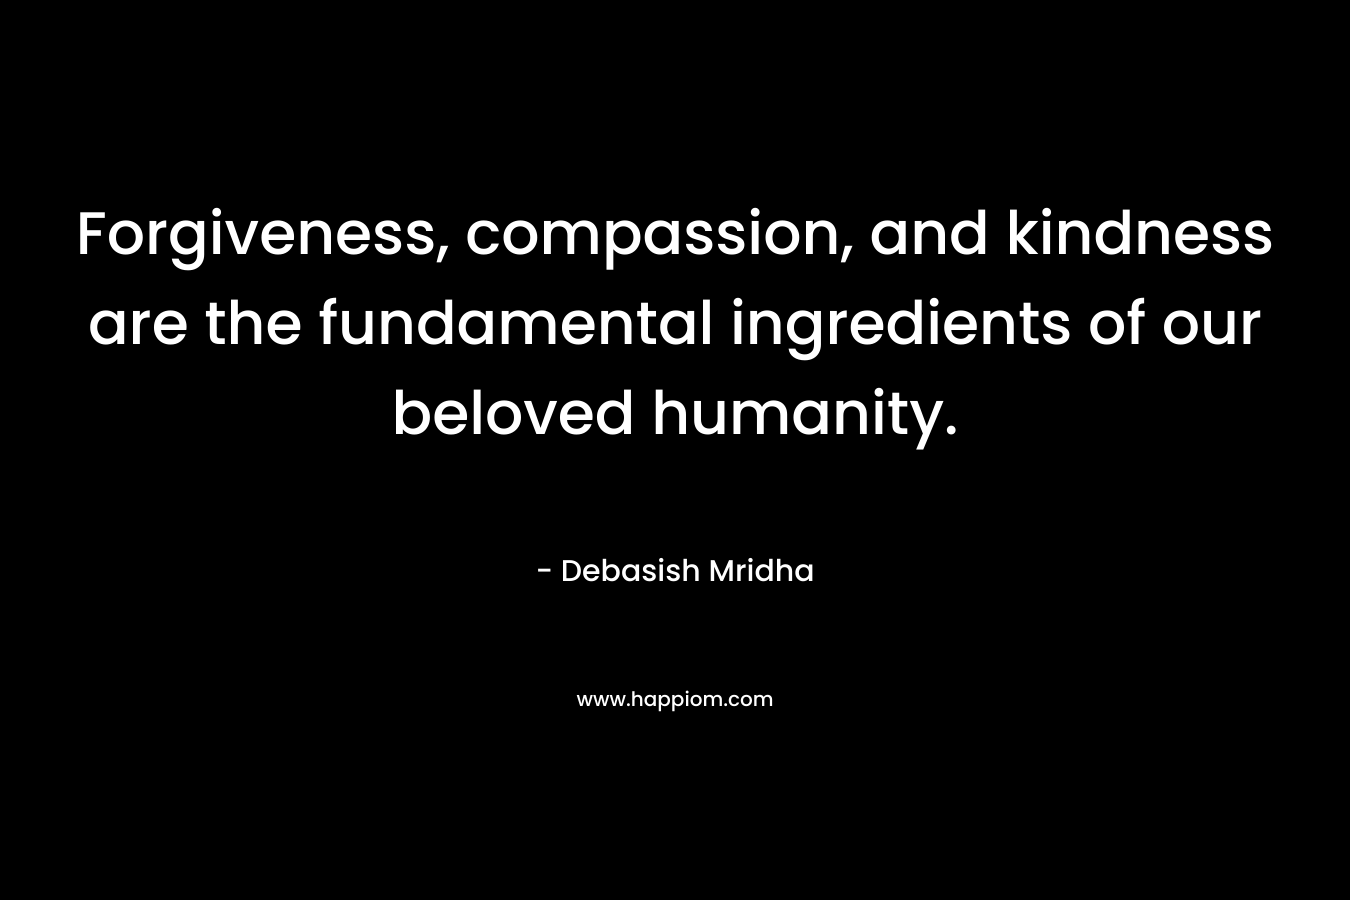 Forgiveness, compassion, and kindness are the fundamental ingredients of our beloved humanity.